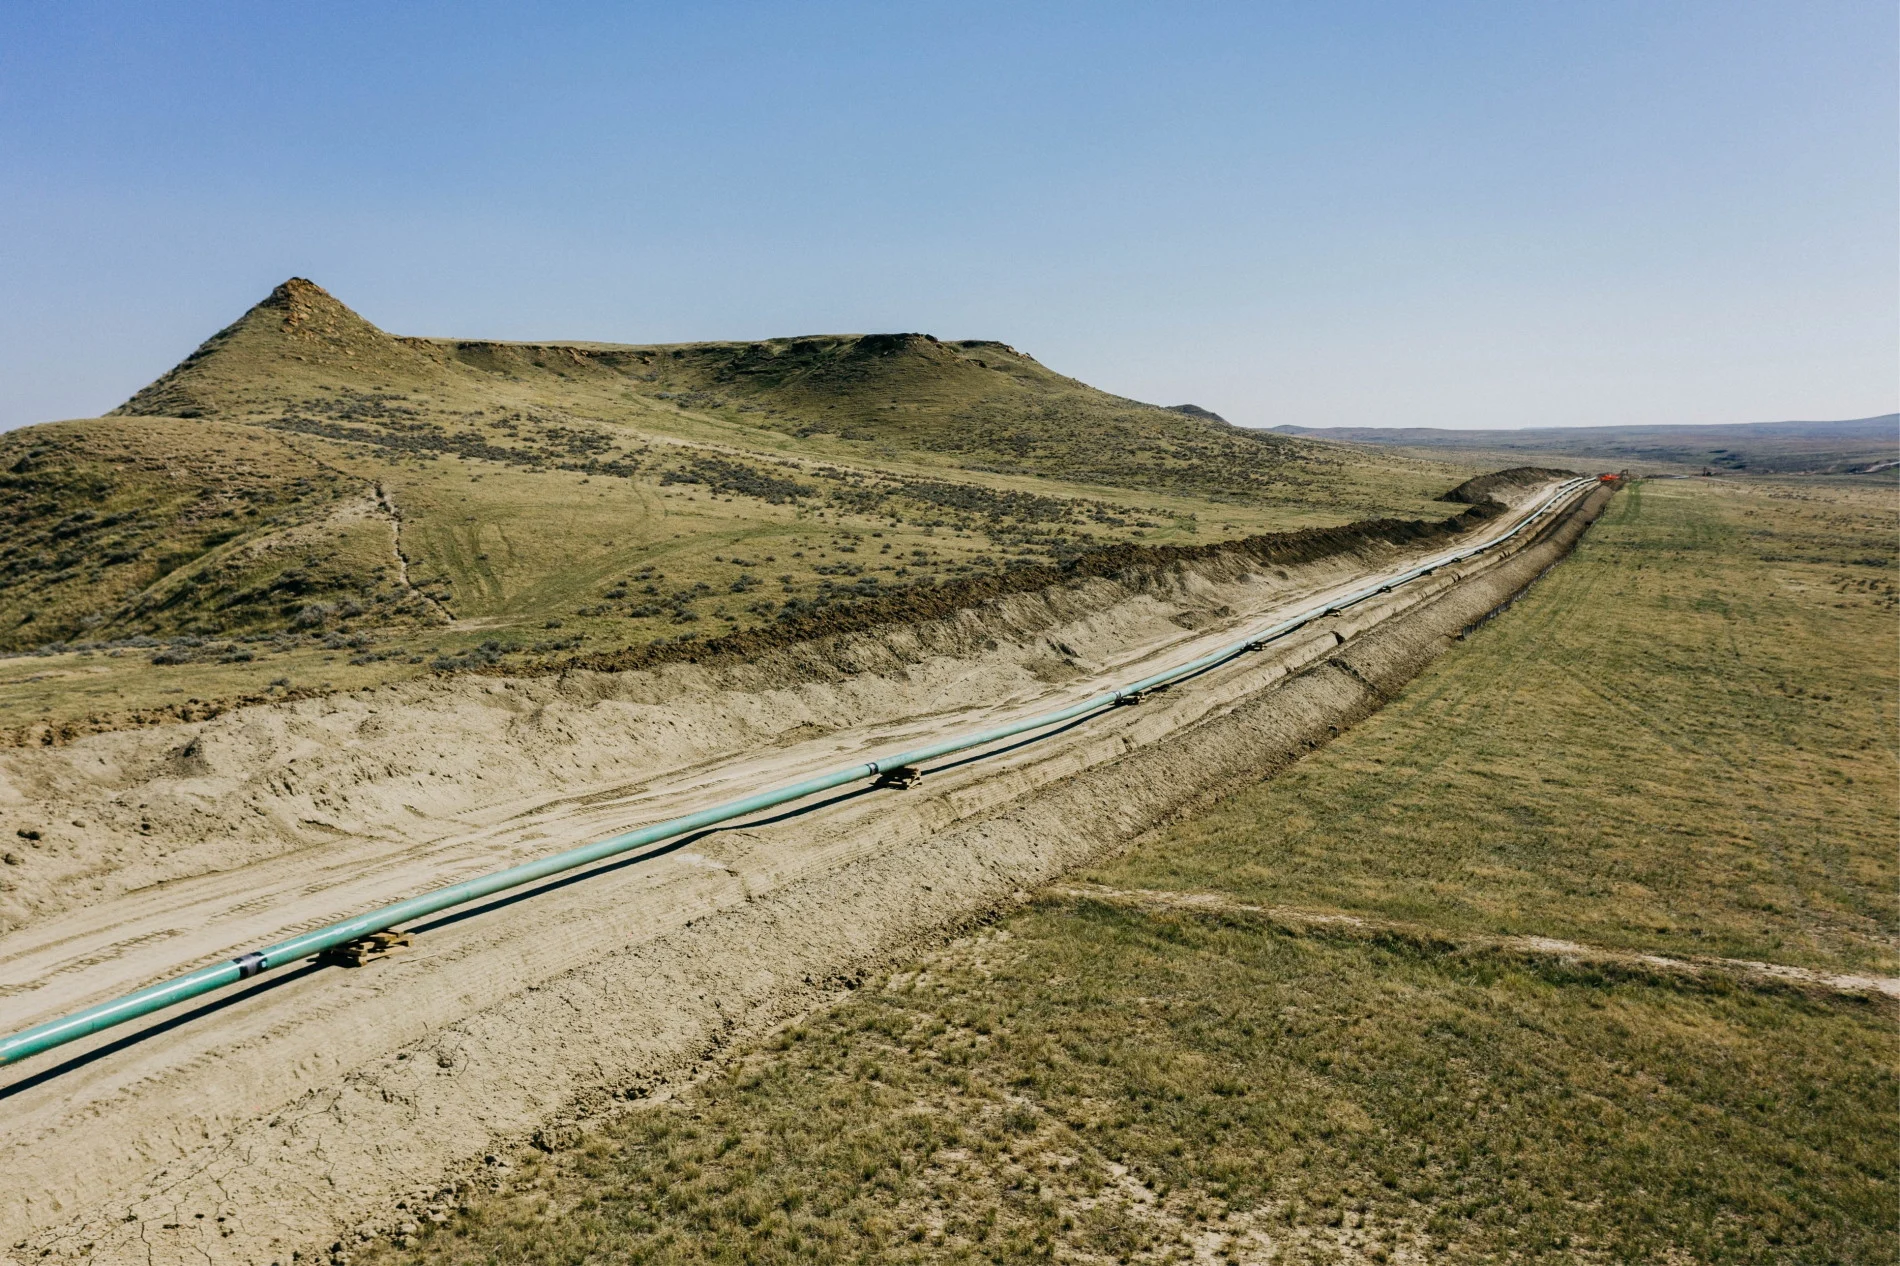 N. America's old pipelines seek new life moving carbon in climate push